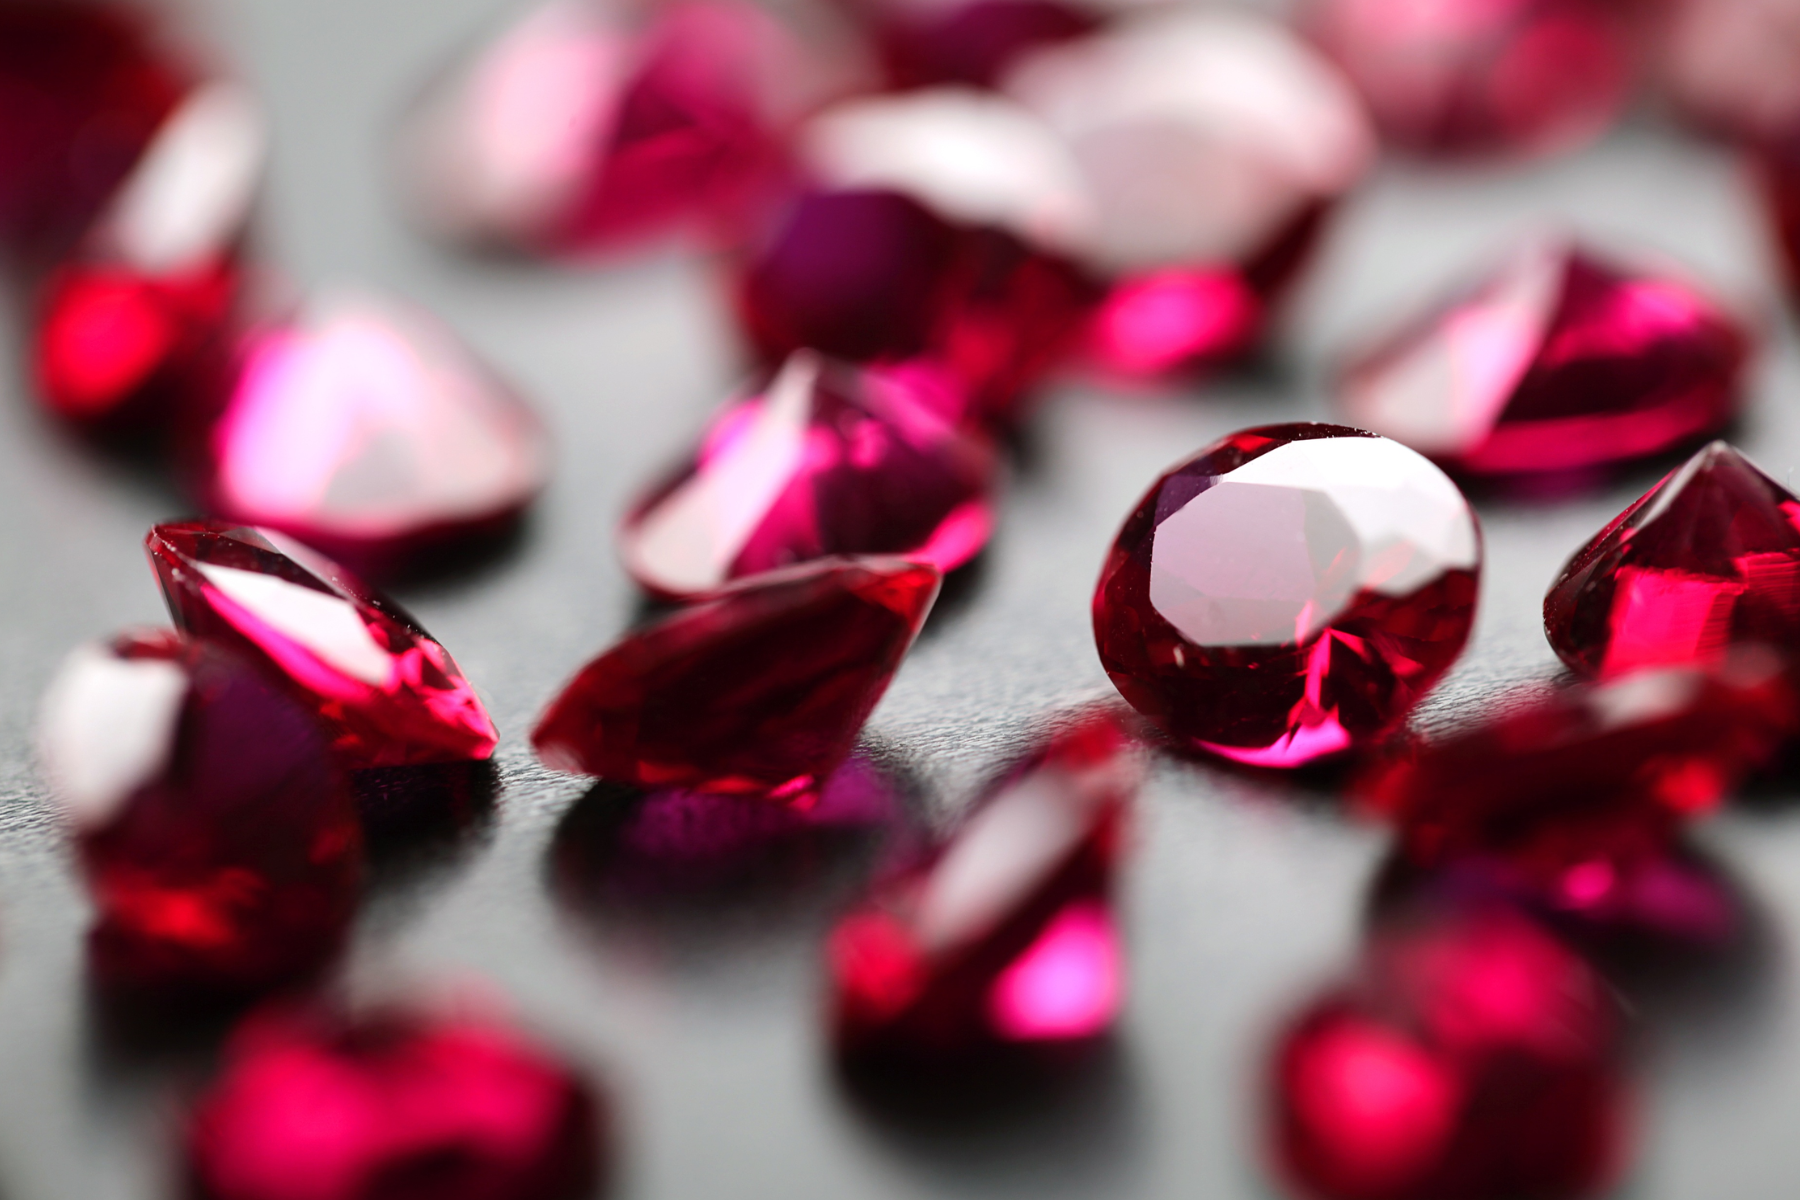 A group of ruby stones